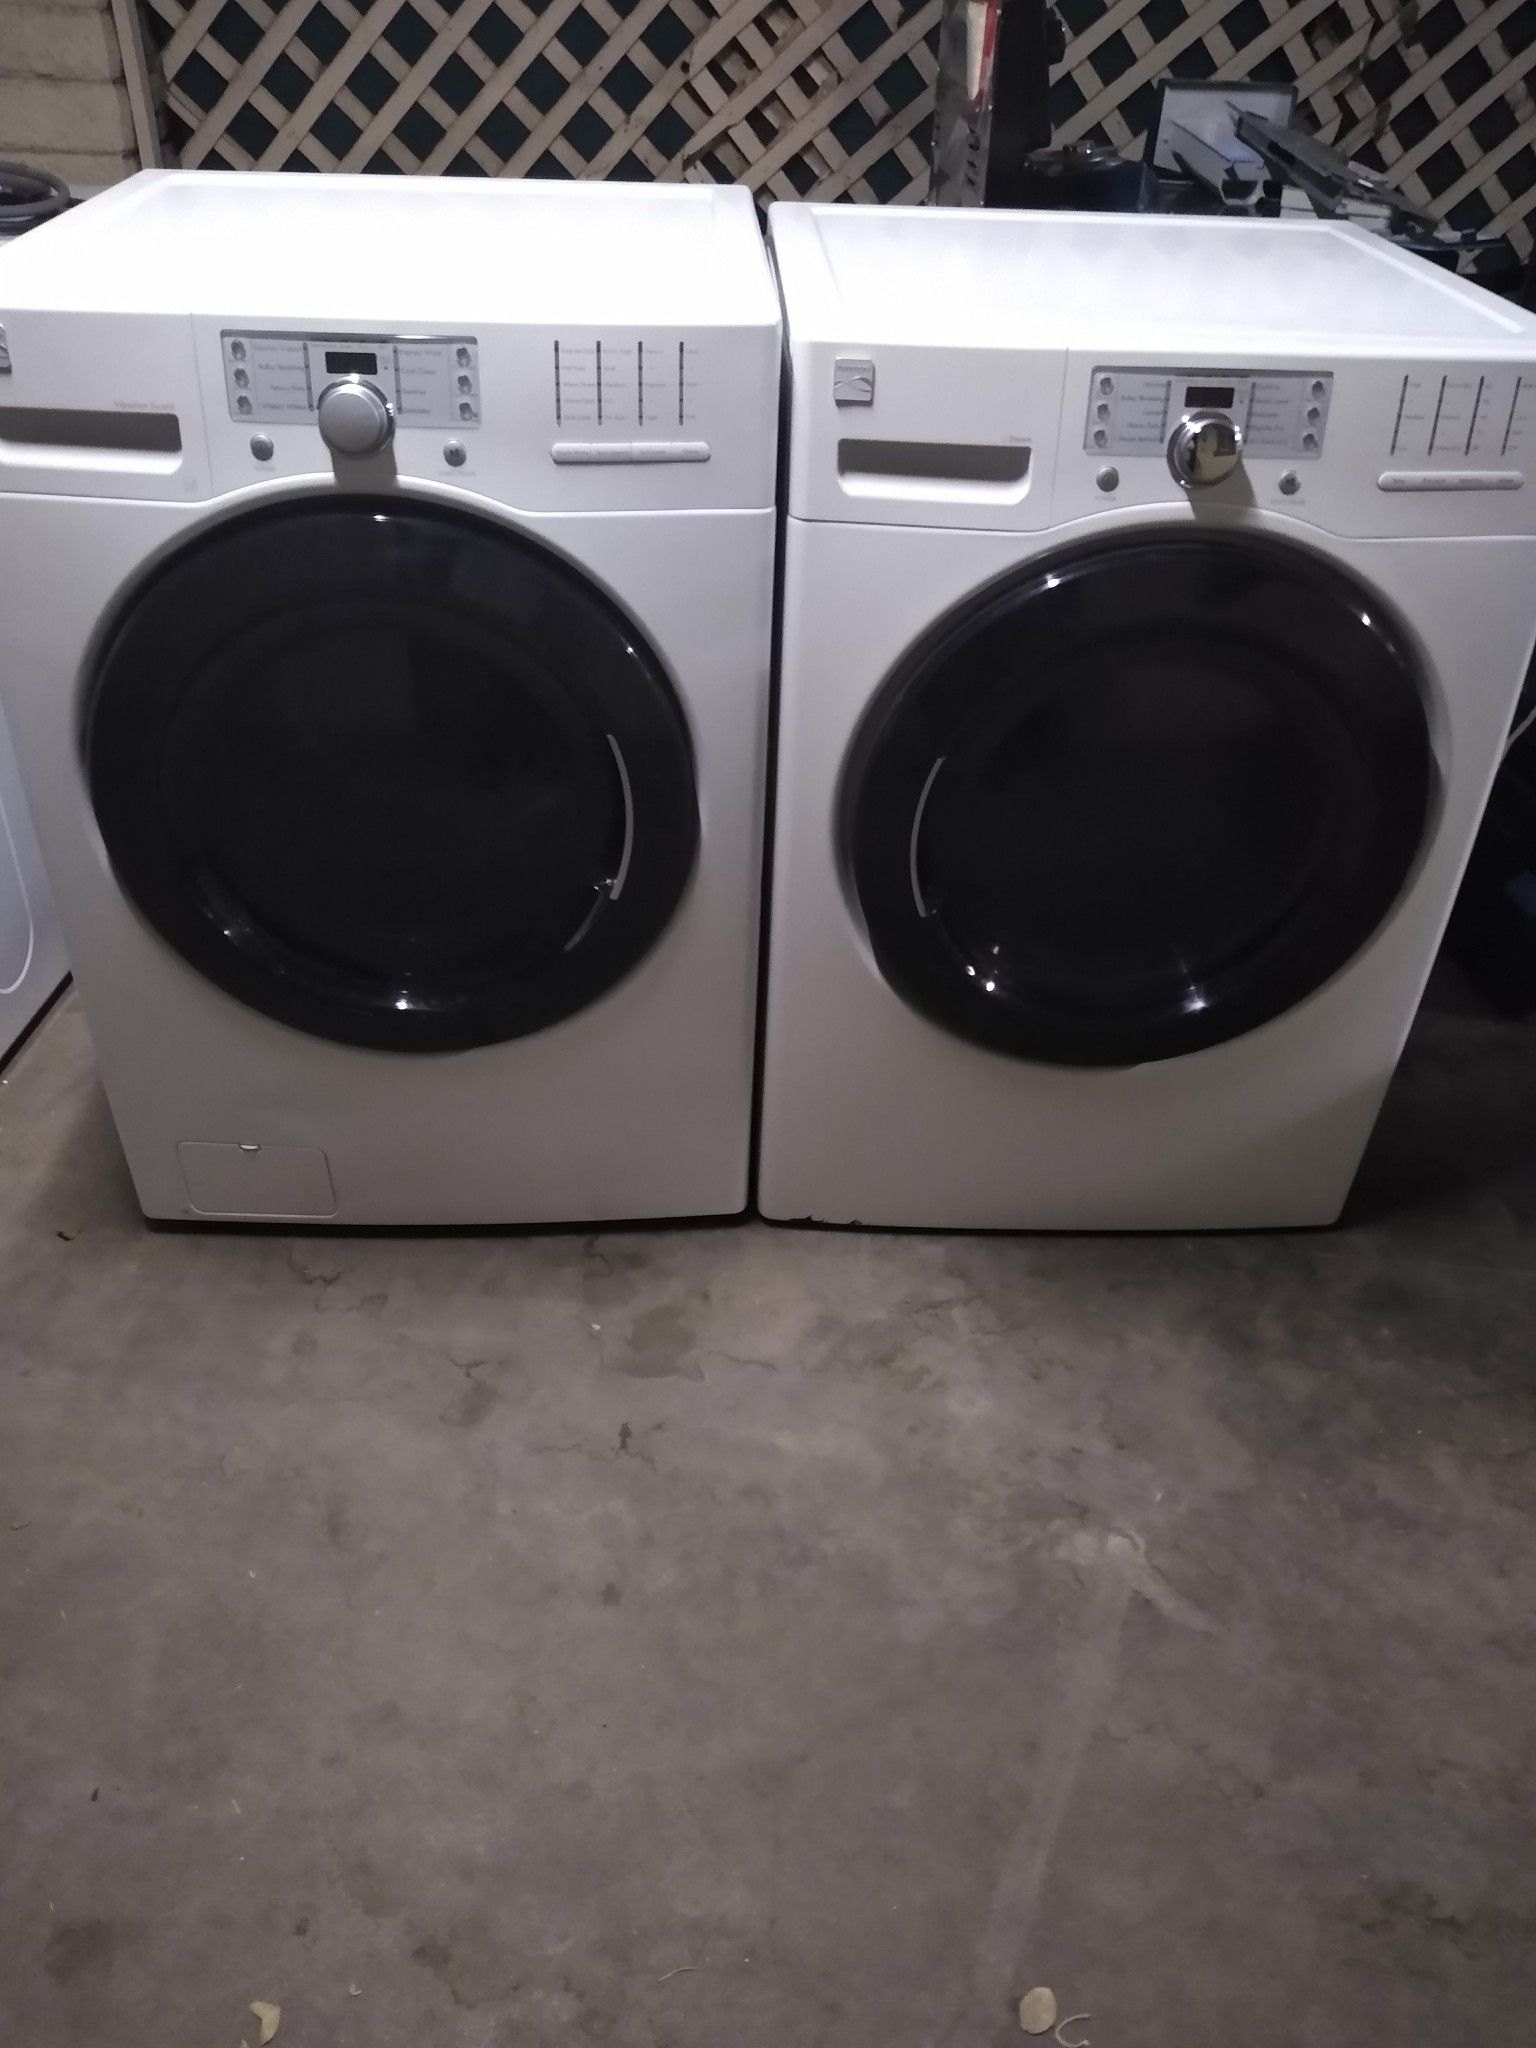 2016 Kenmore washer and electric dryer